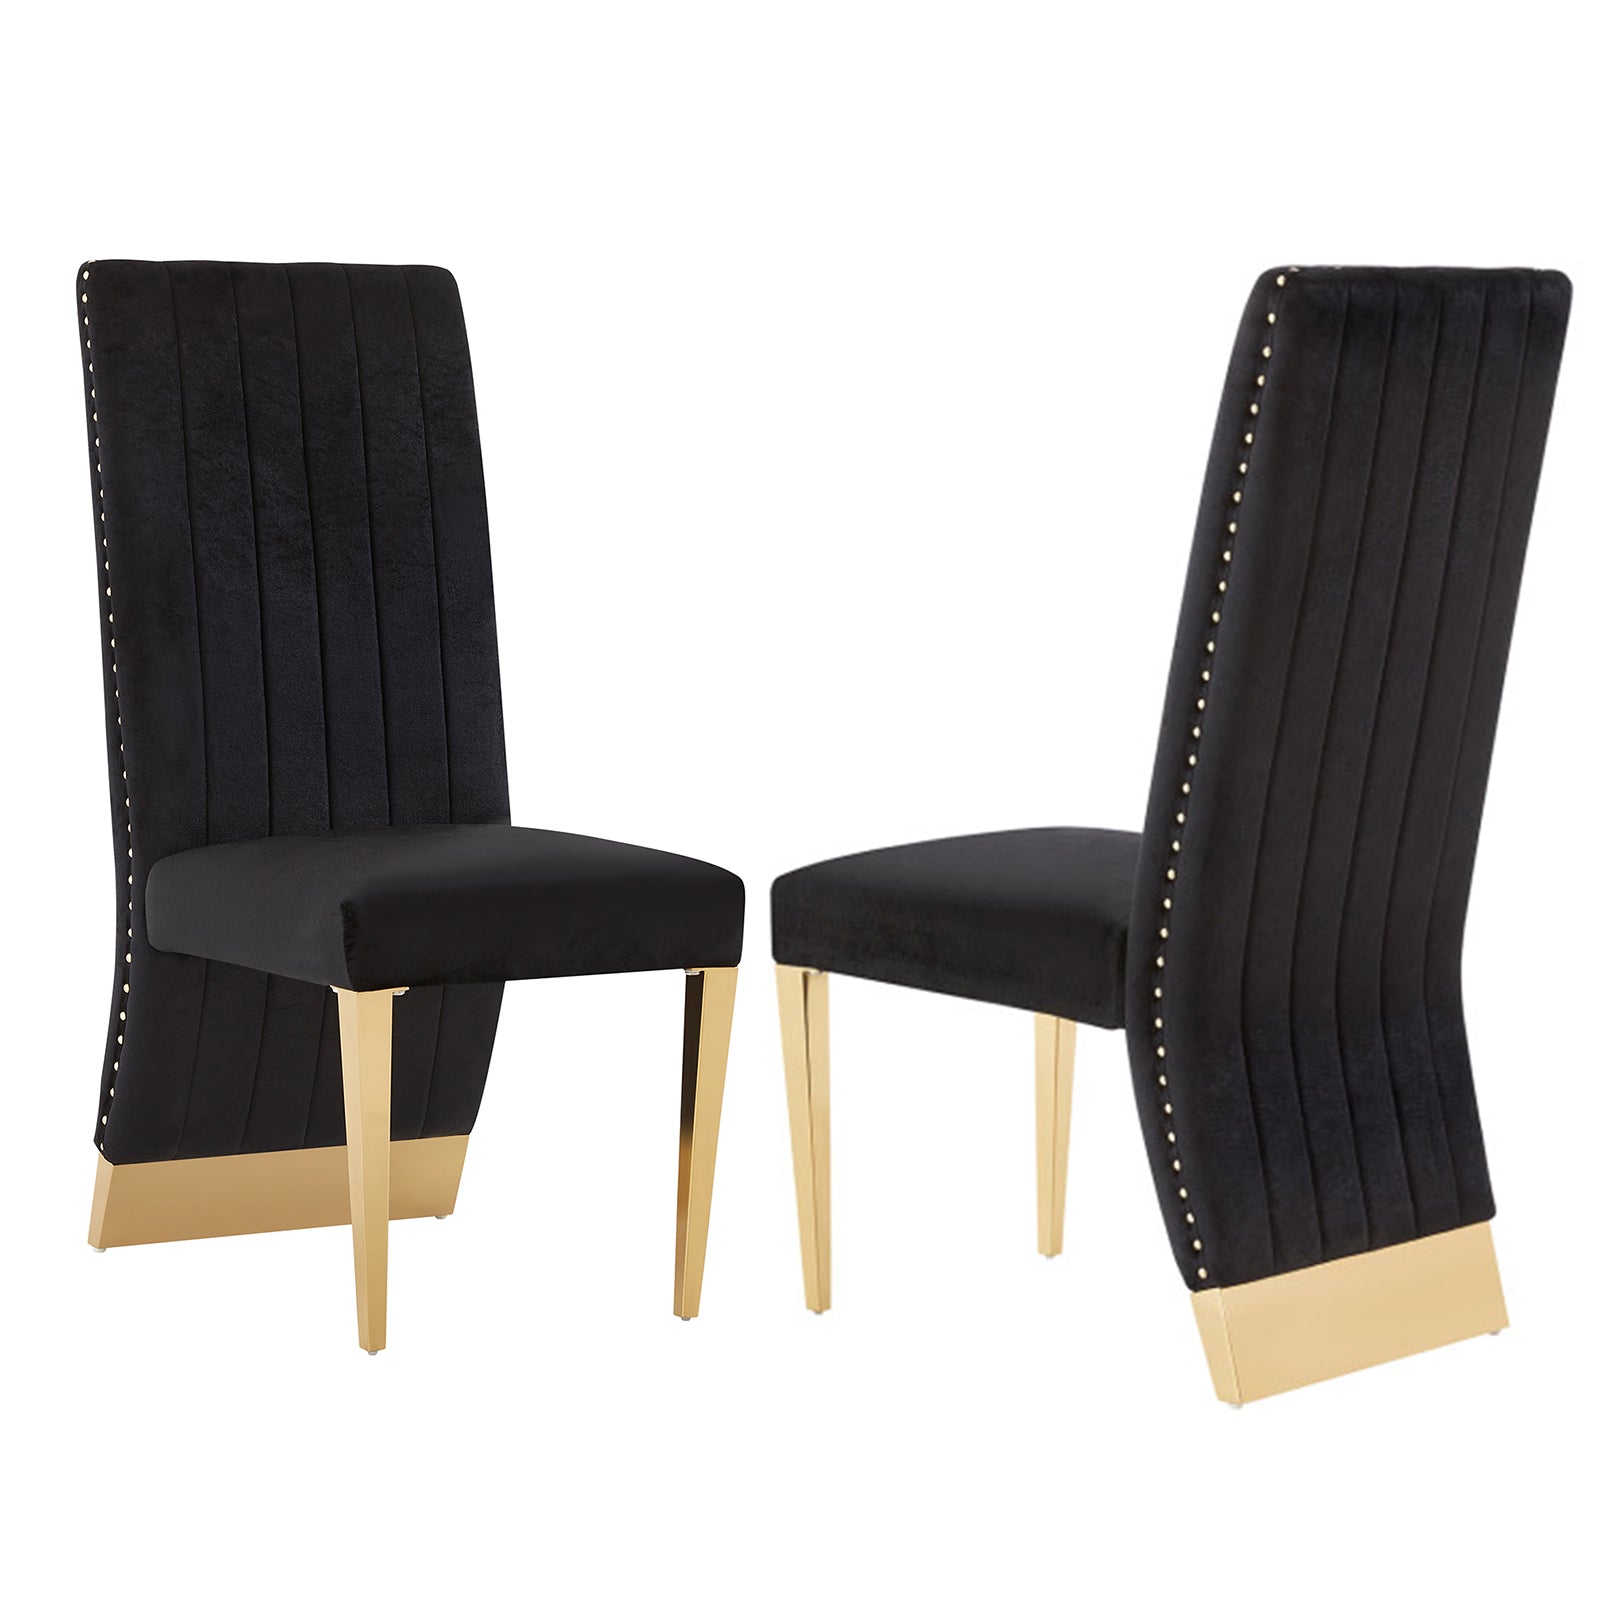 Elegant Black and Gold Dining Chairs for Stylish Dining Spaces